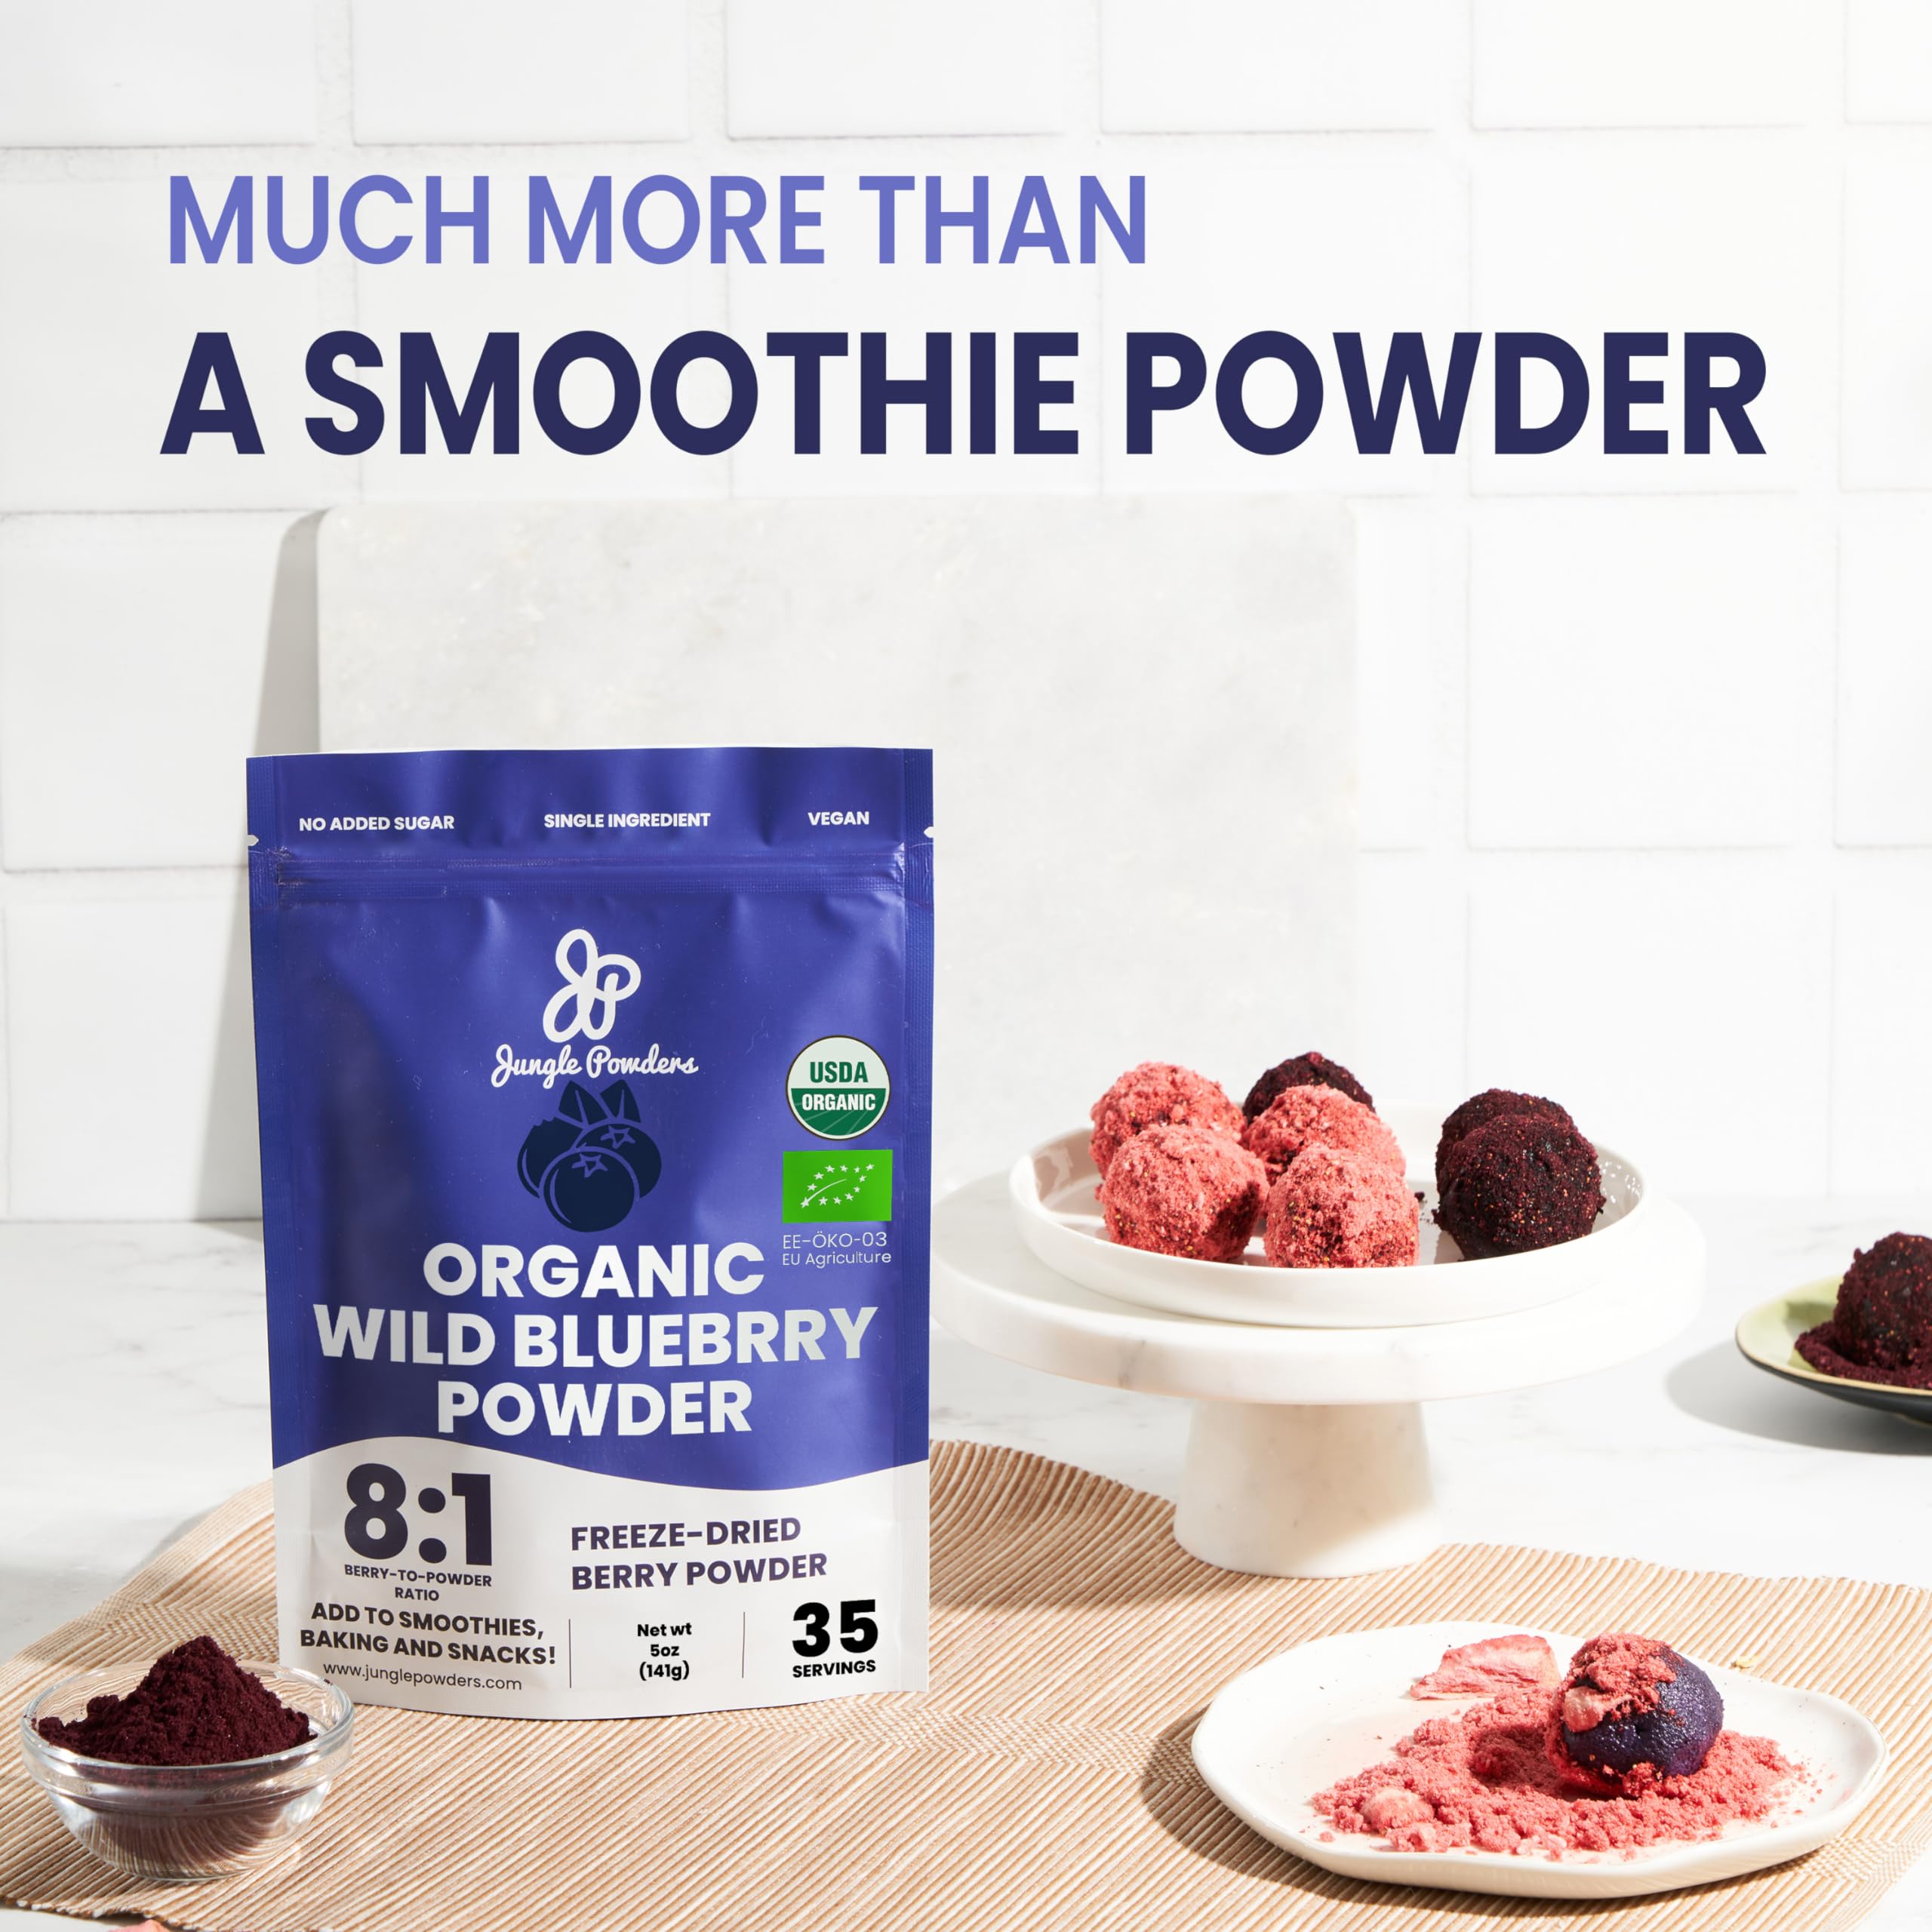 Jungle Powders Wild Bilberry Extract Organic Blueberry Powder USDA Organic Raspberry Powder Bundle Blueberries Raspberries Powdered Whole Berry for Baking Bilberry Supplement for Eyes